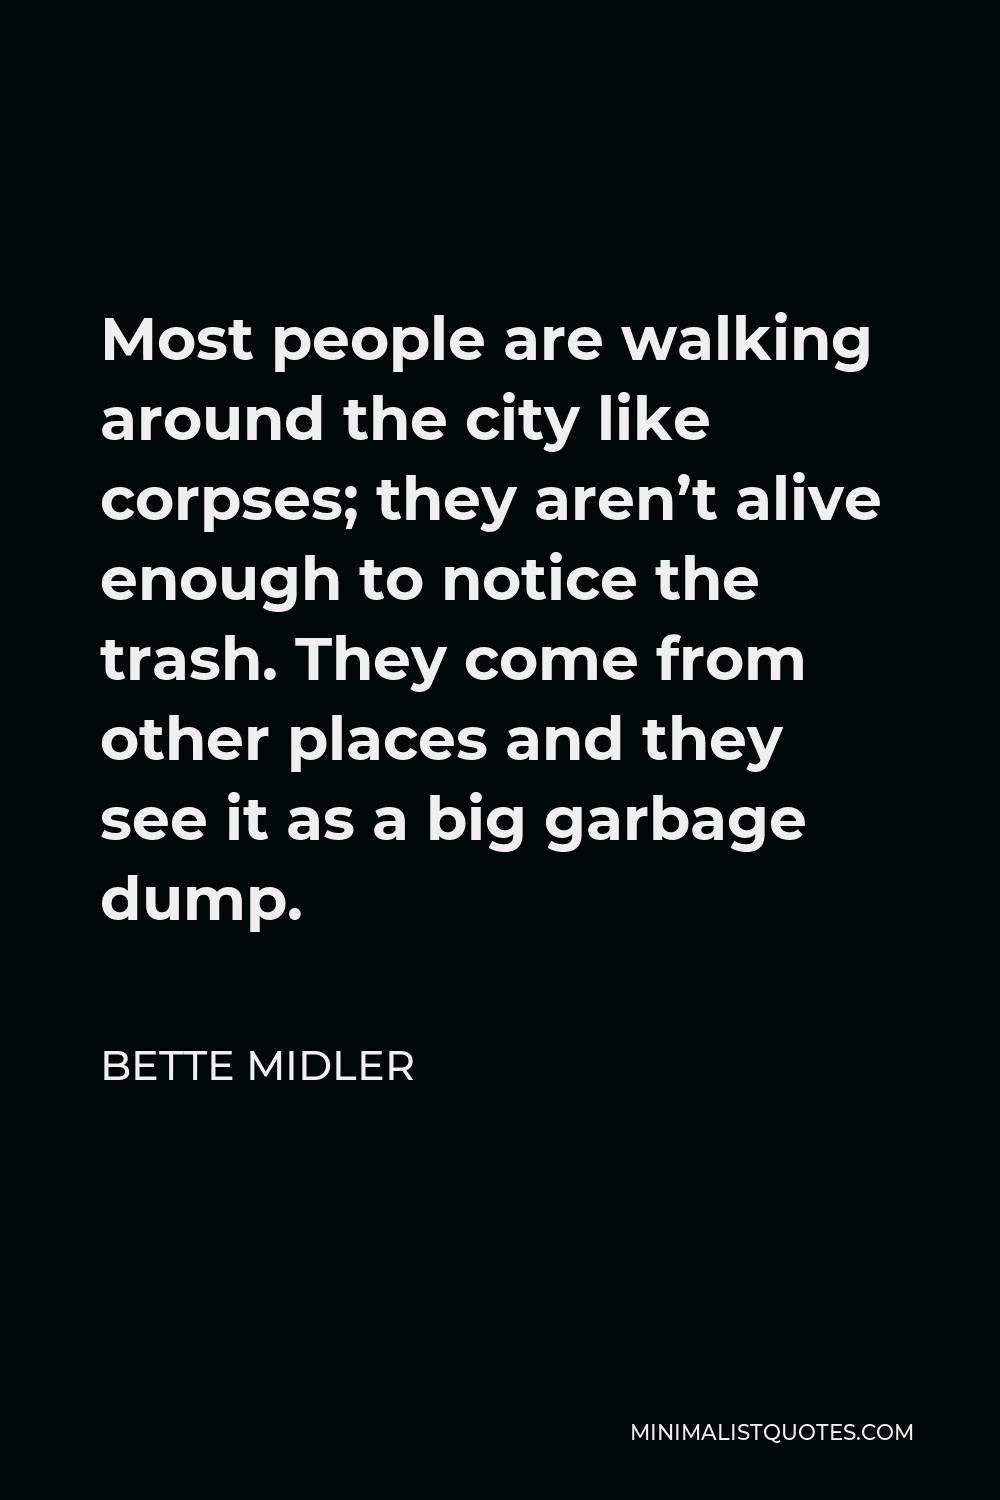 Bette Midler Quote - Most people are walking around the city like corpses; they aren’t alive enough to notice the trash. They come from other places and they see it as a big garbage dump.